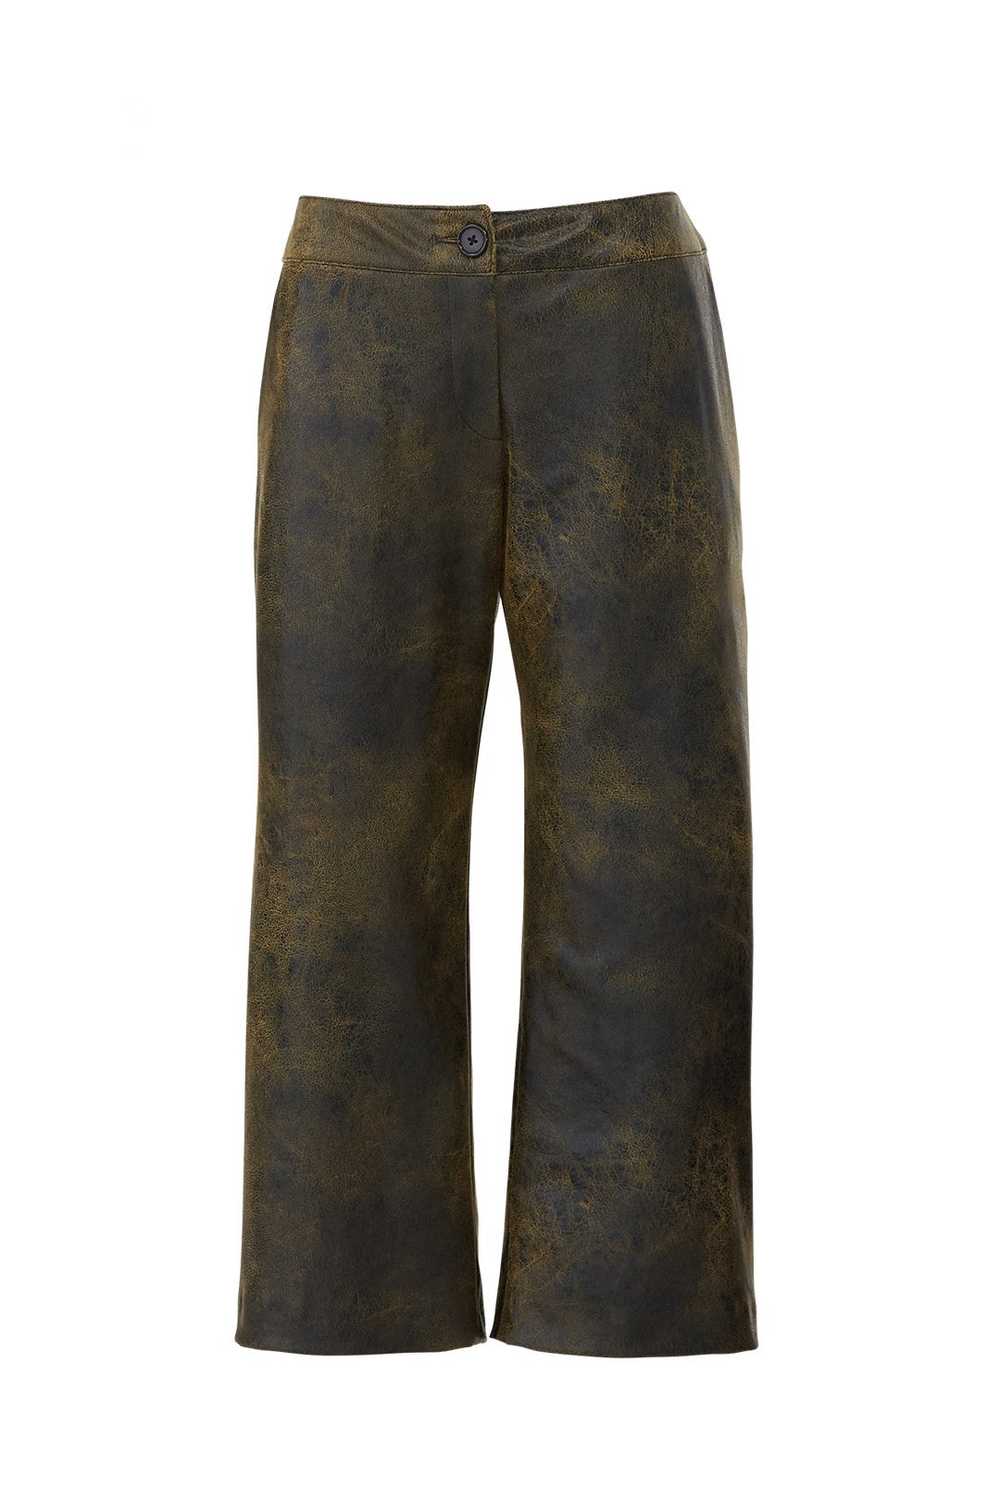 Snider Franz Faux Leather Gaucho Pants - image 4